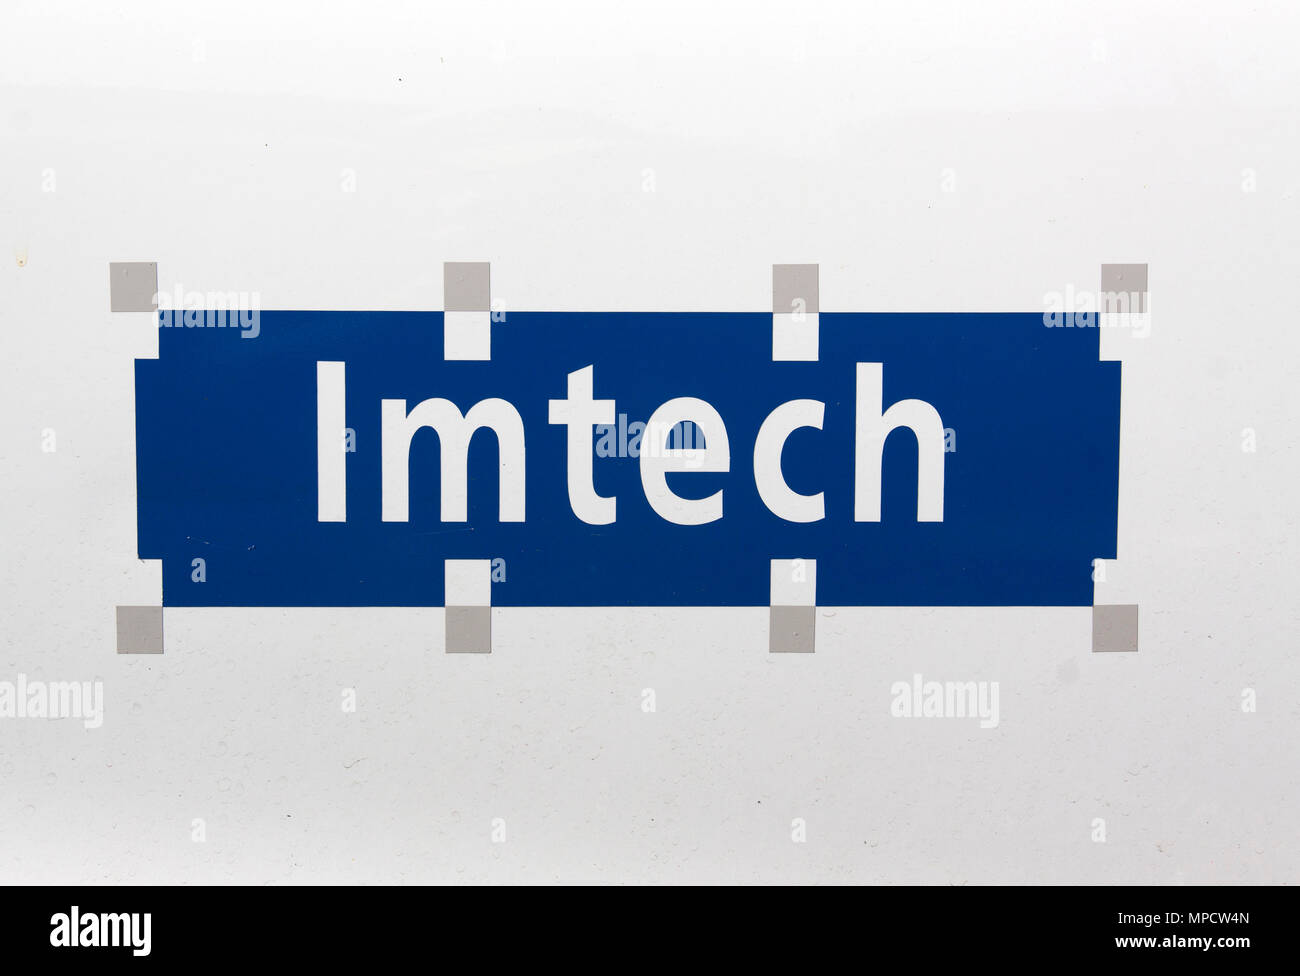 Amsterdam,Netherlands-august 7, 2015: sign of IMtech, Imtech NV is a Dutch technical service company in the field of electrical and mechanical enginee Stock Photo